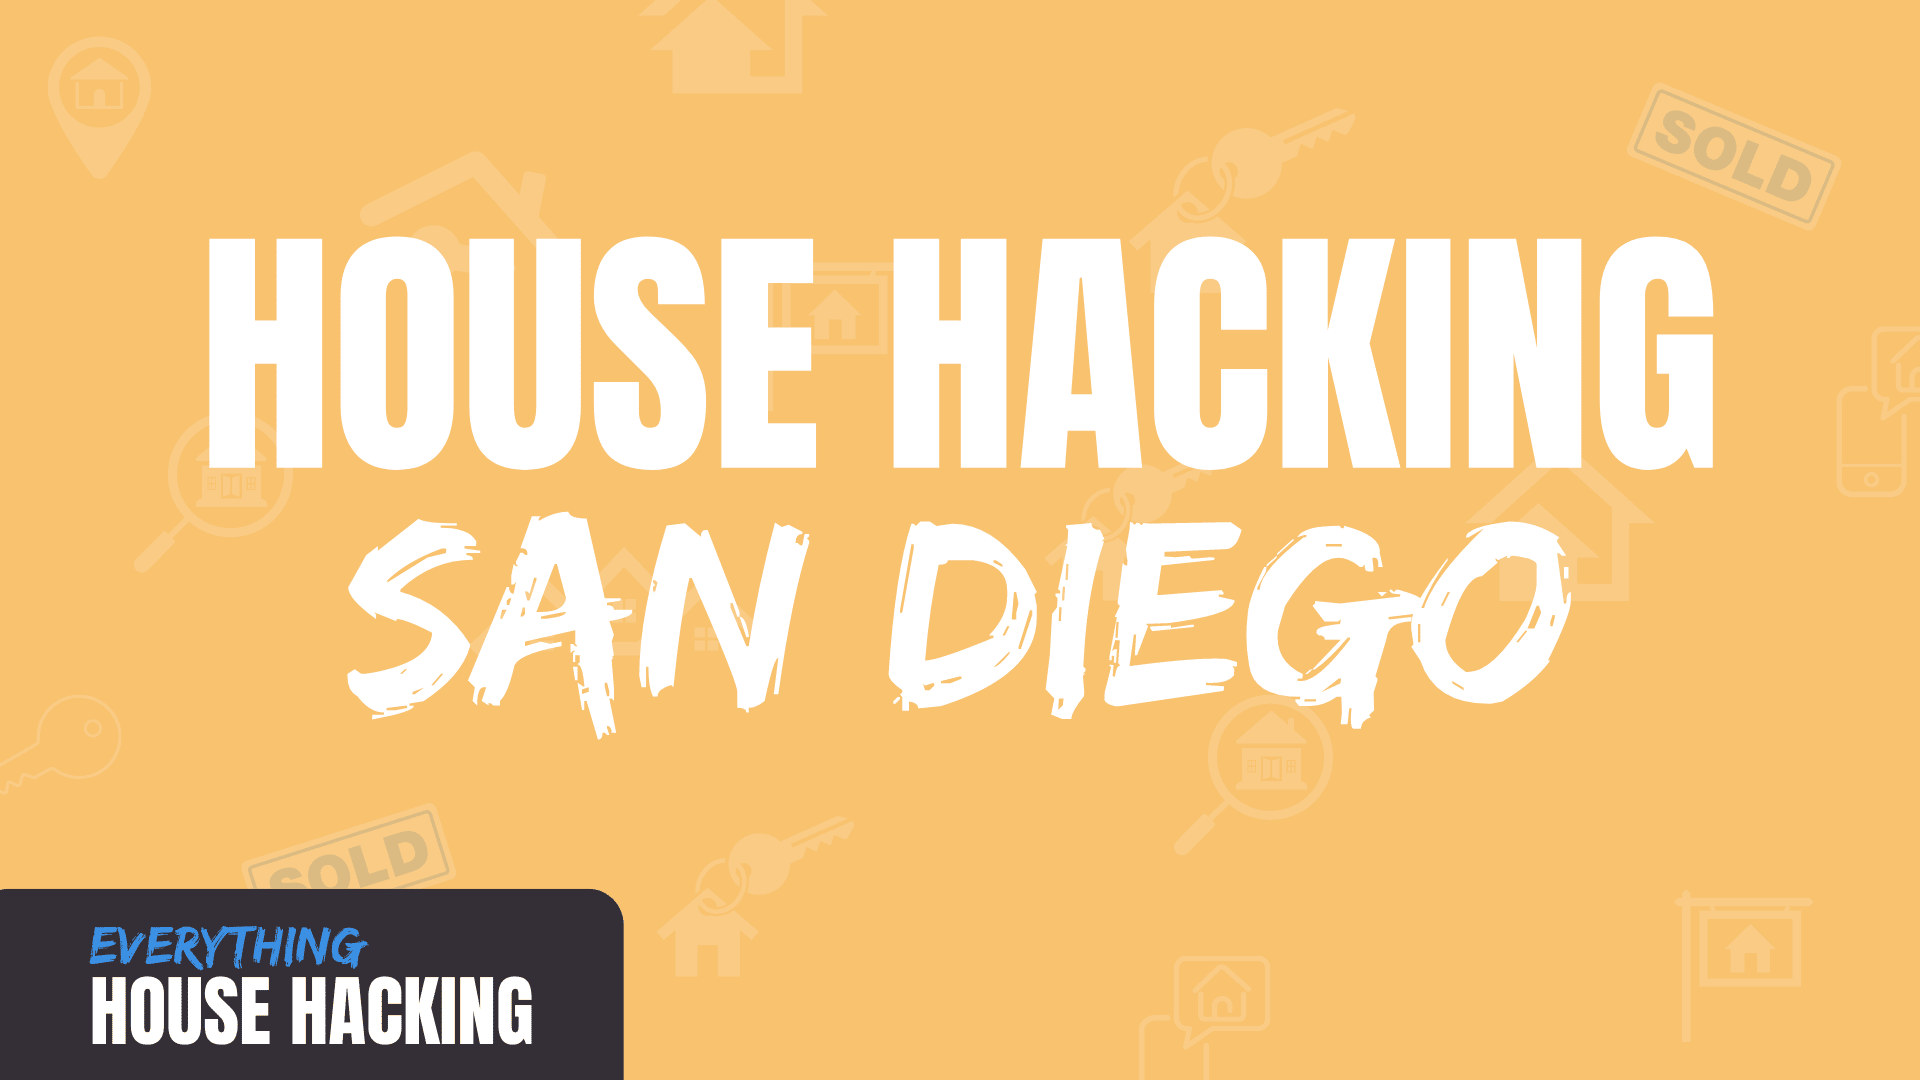 house hacking San Diego in white text on yellow background